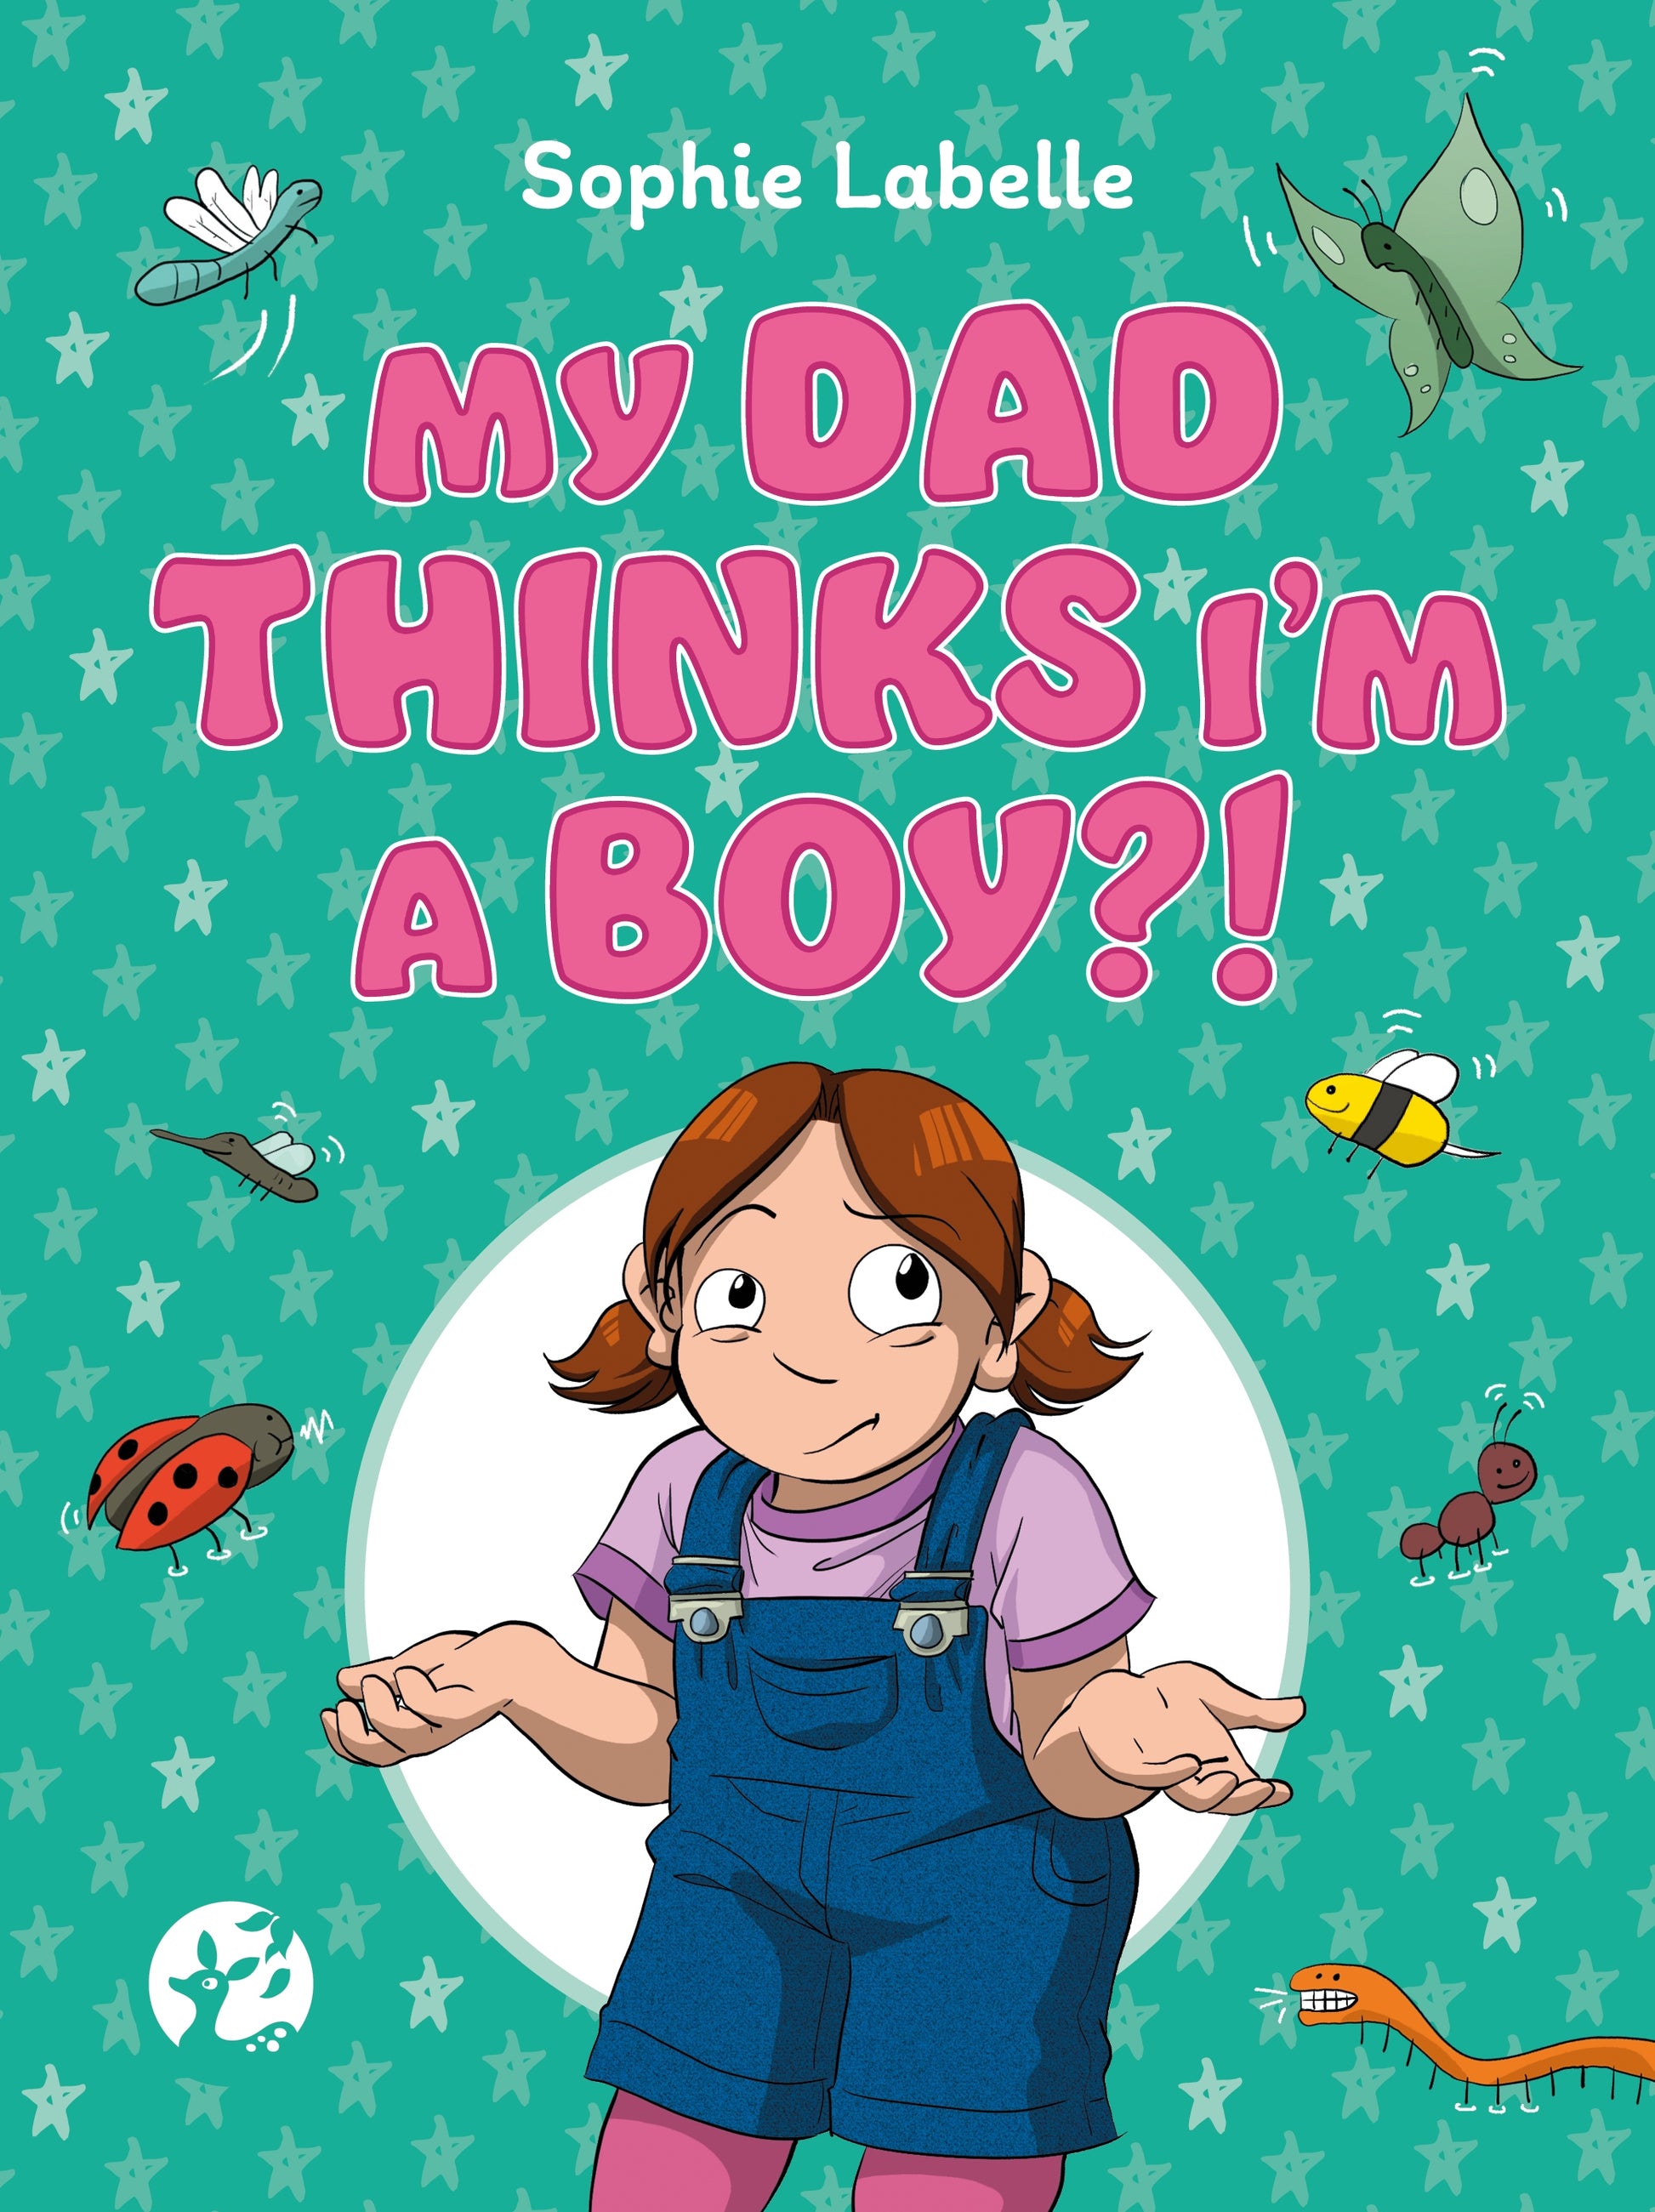 My Dad Thinks I'm a Boy?! by Sophie Labelle